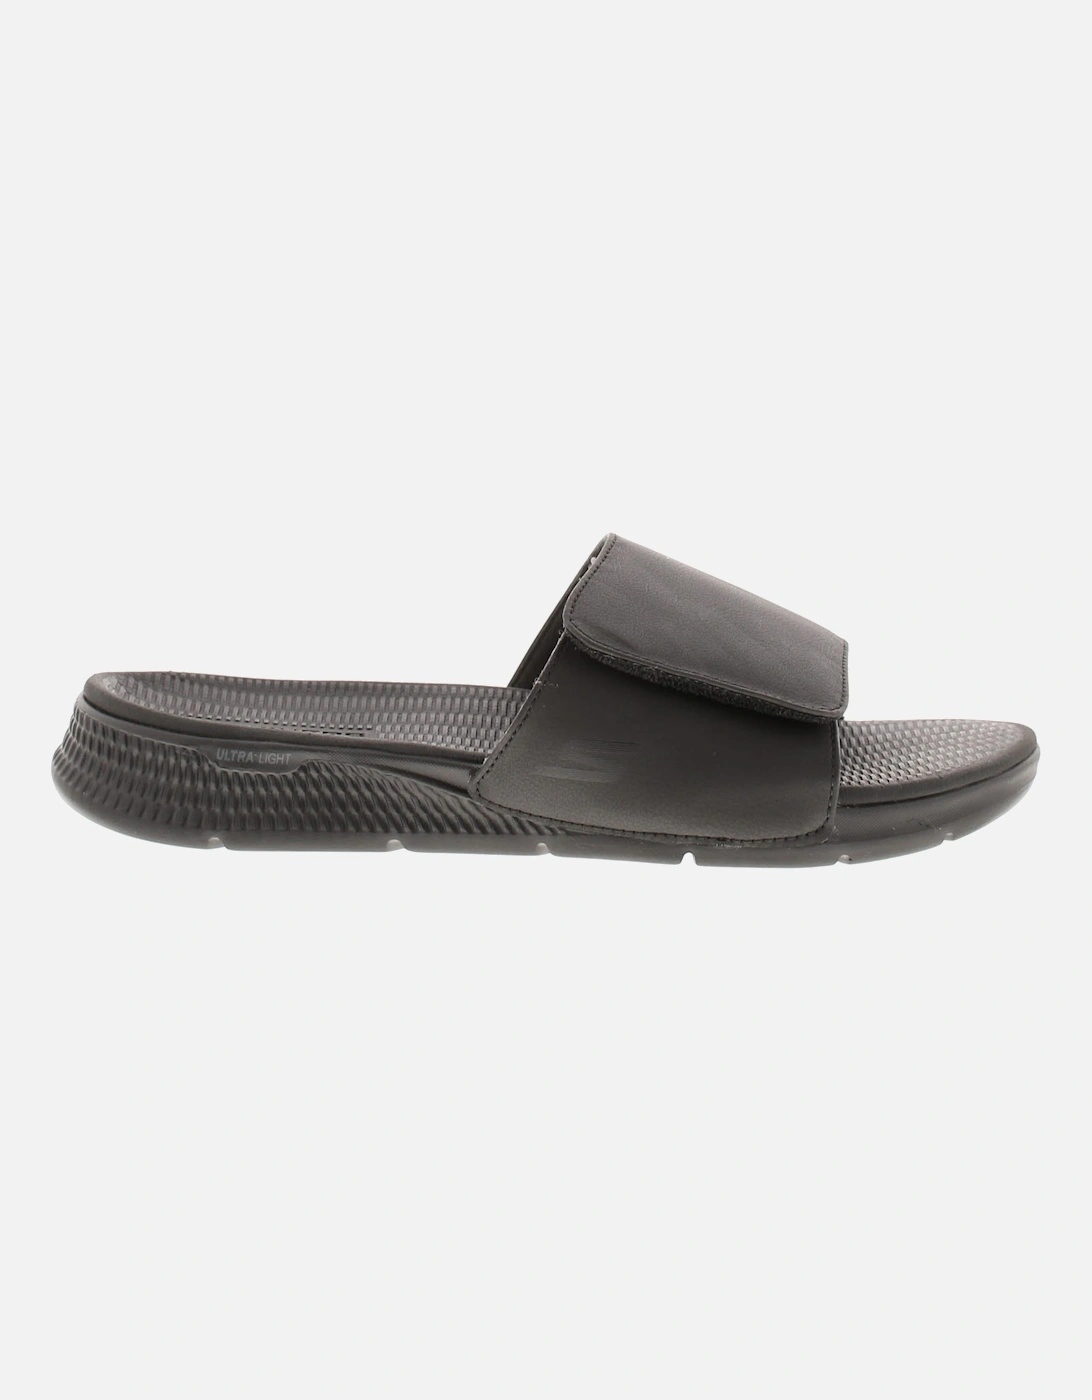 Mens Beach Sandals Go Consistent Waters Slip On black UK Size